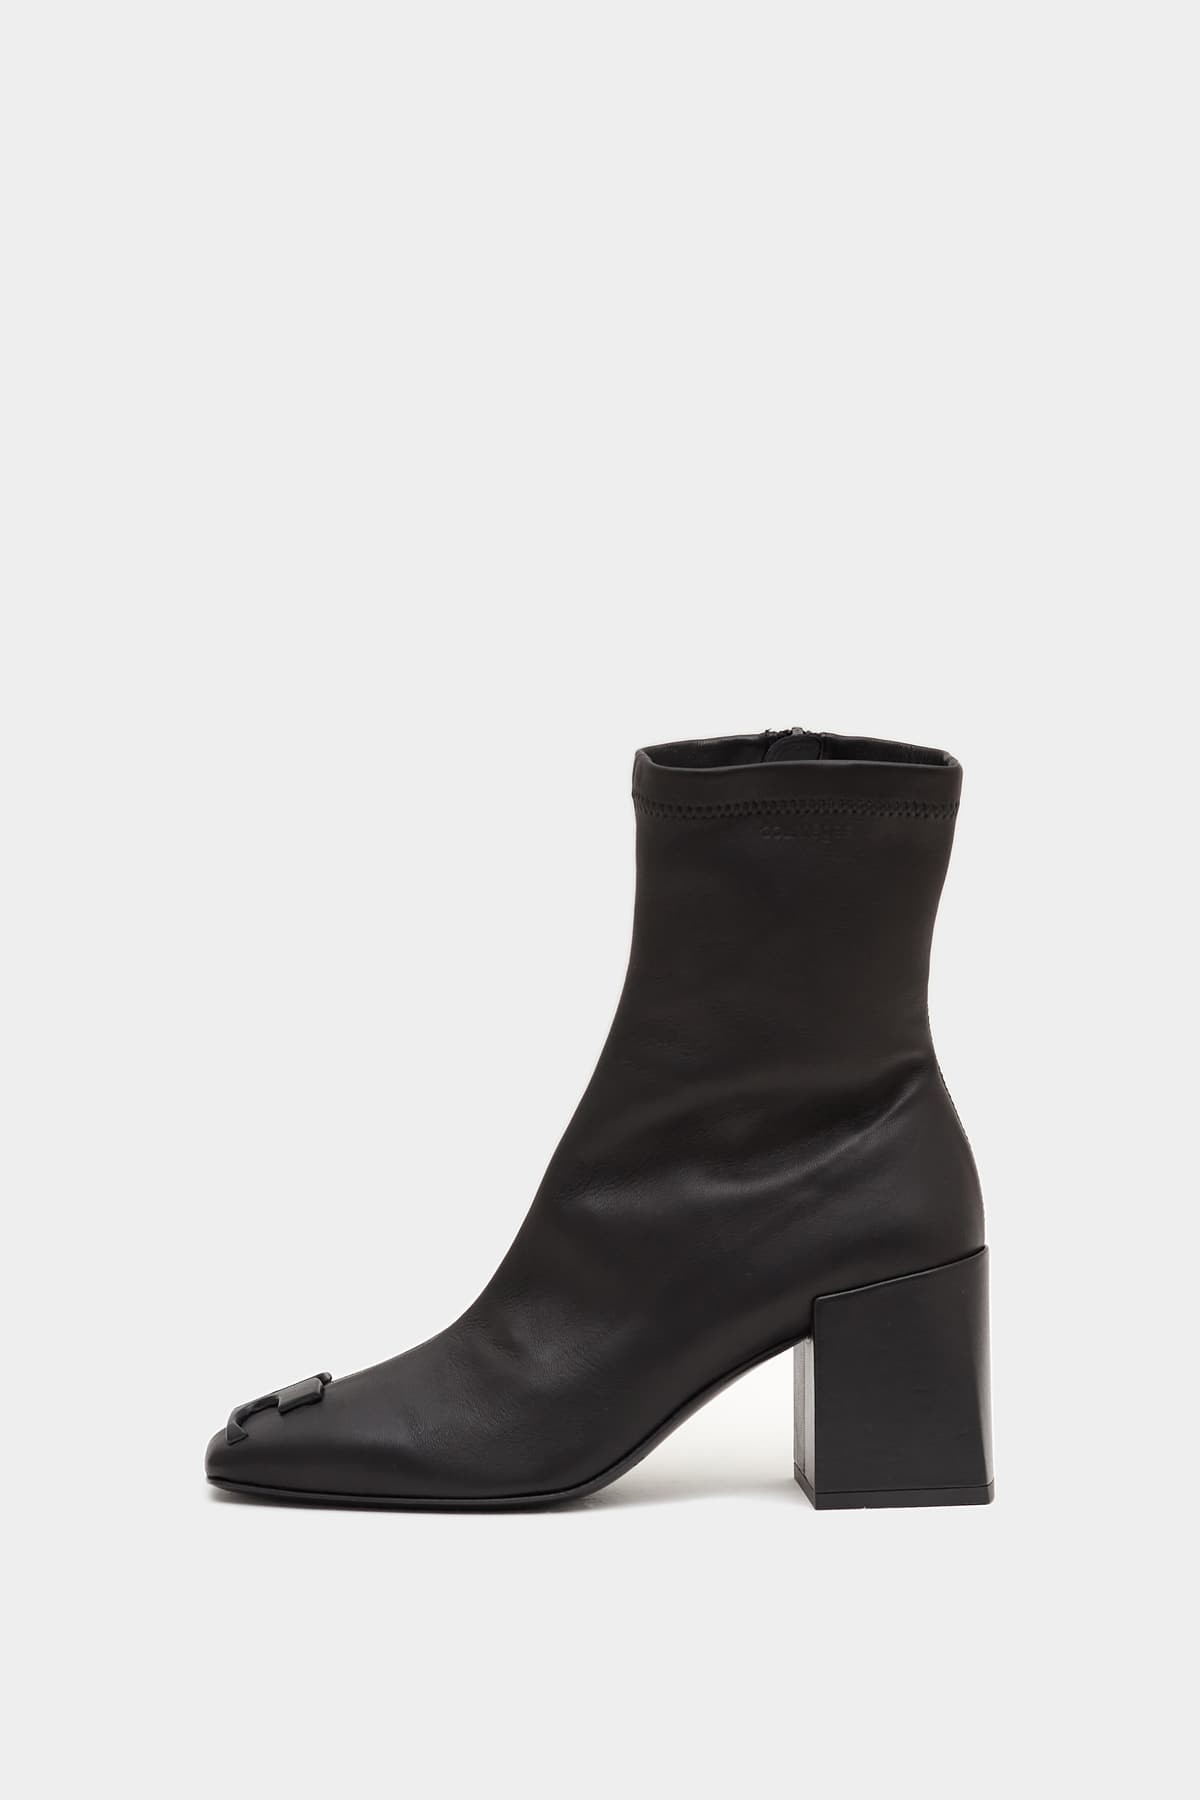 COURREGES BLACK HERITAGE ANKLE BOOTS IAMNUE